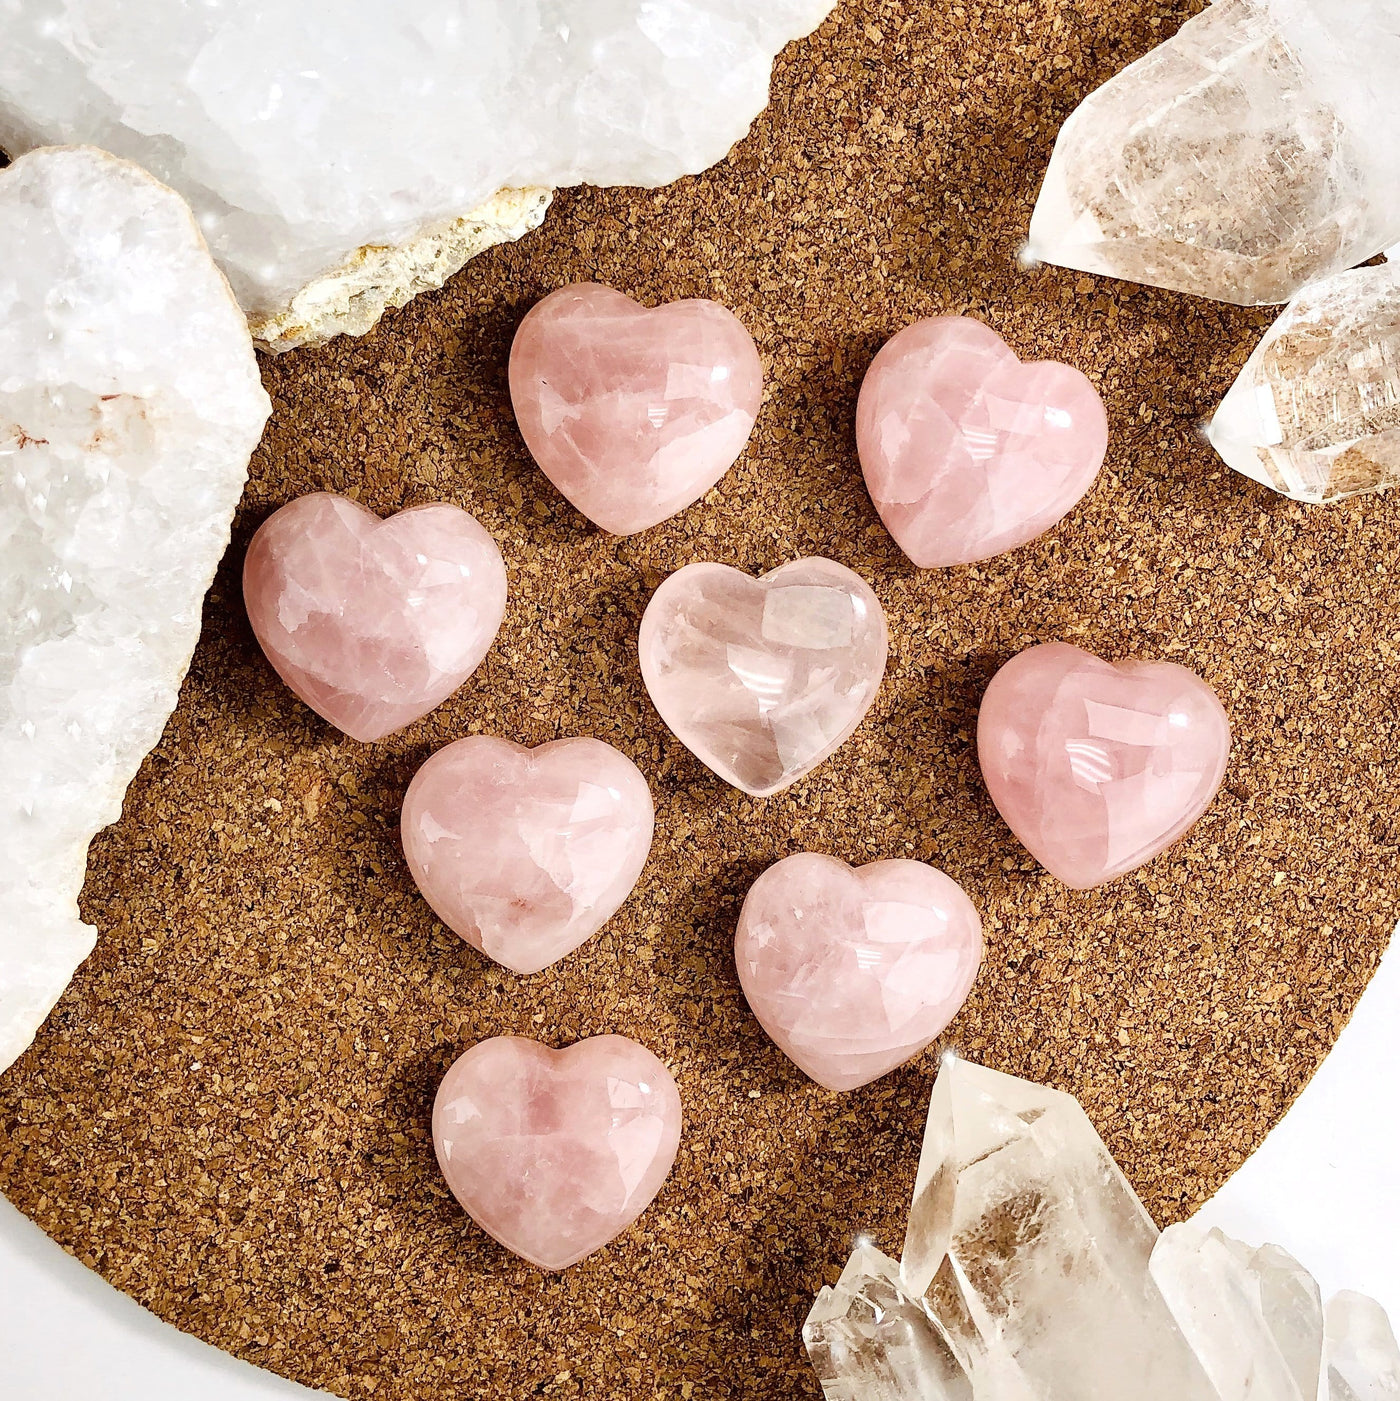 8 Rose Quartz Hearts with other crystals on corkboard